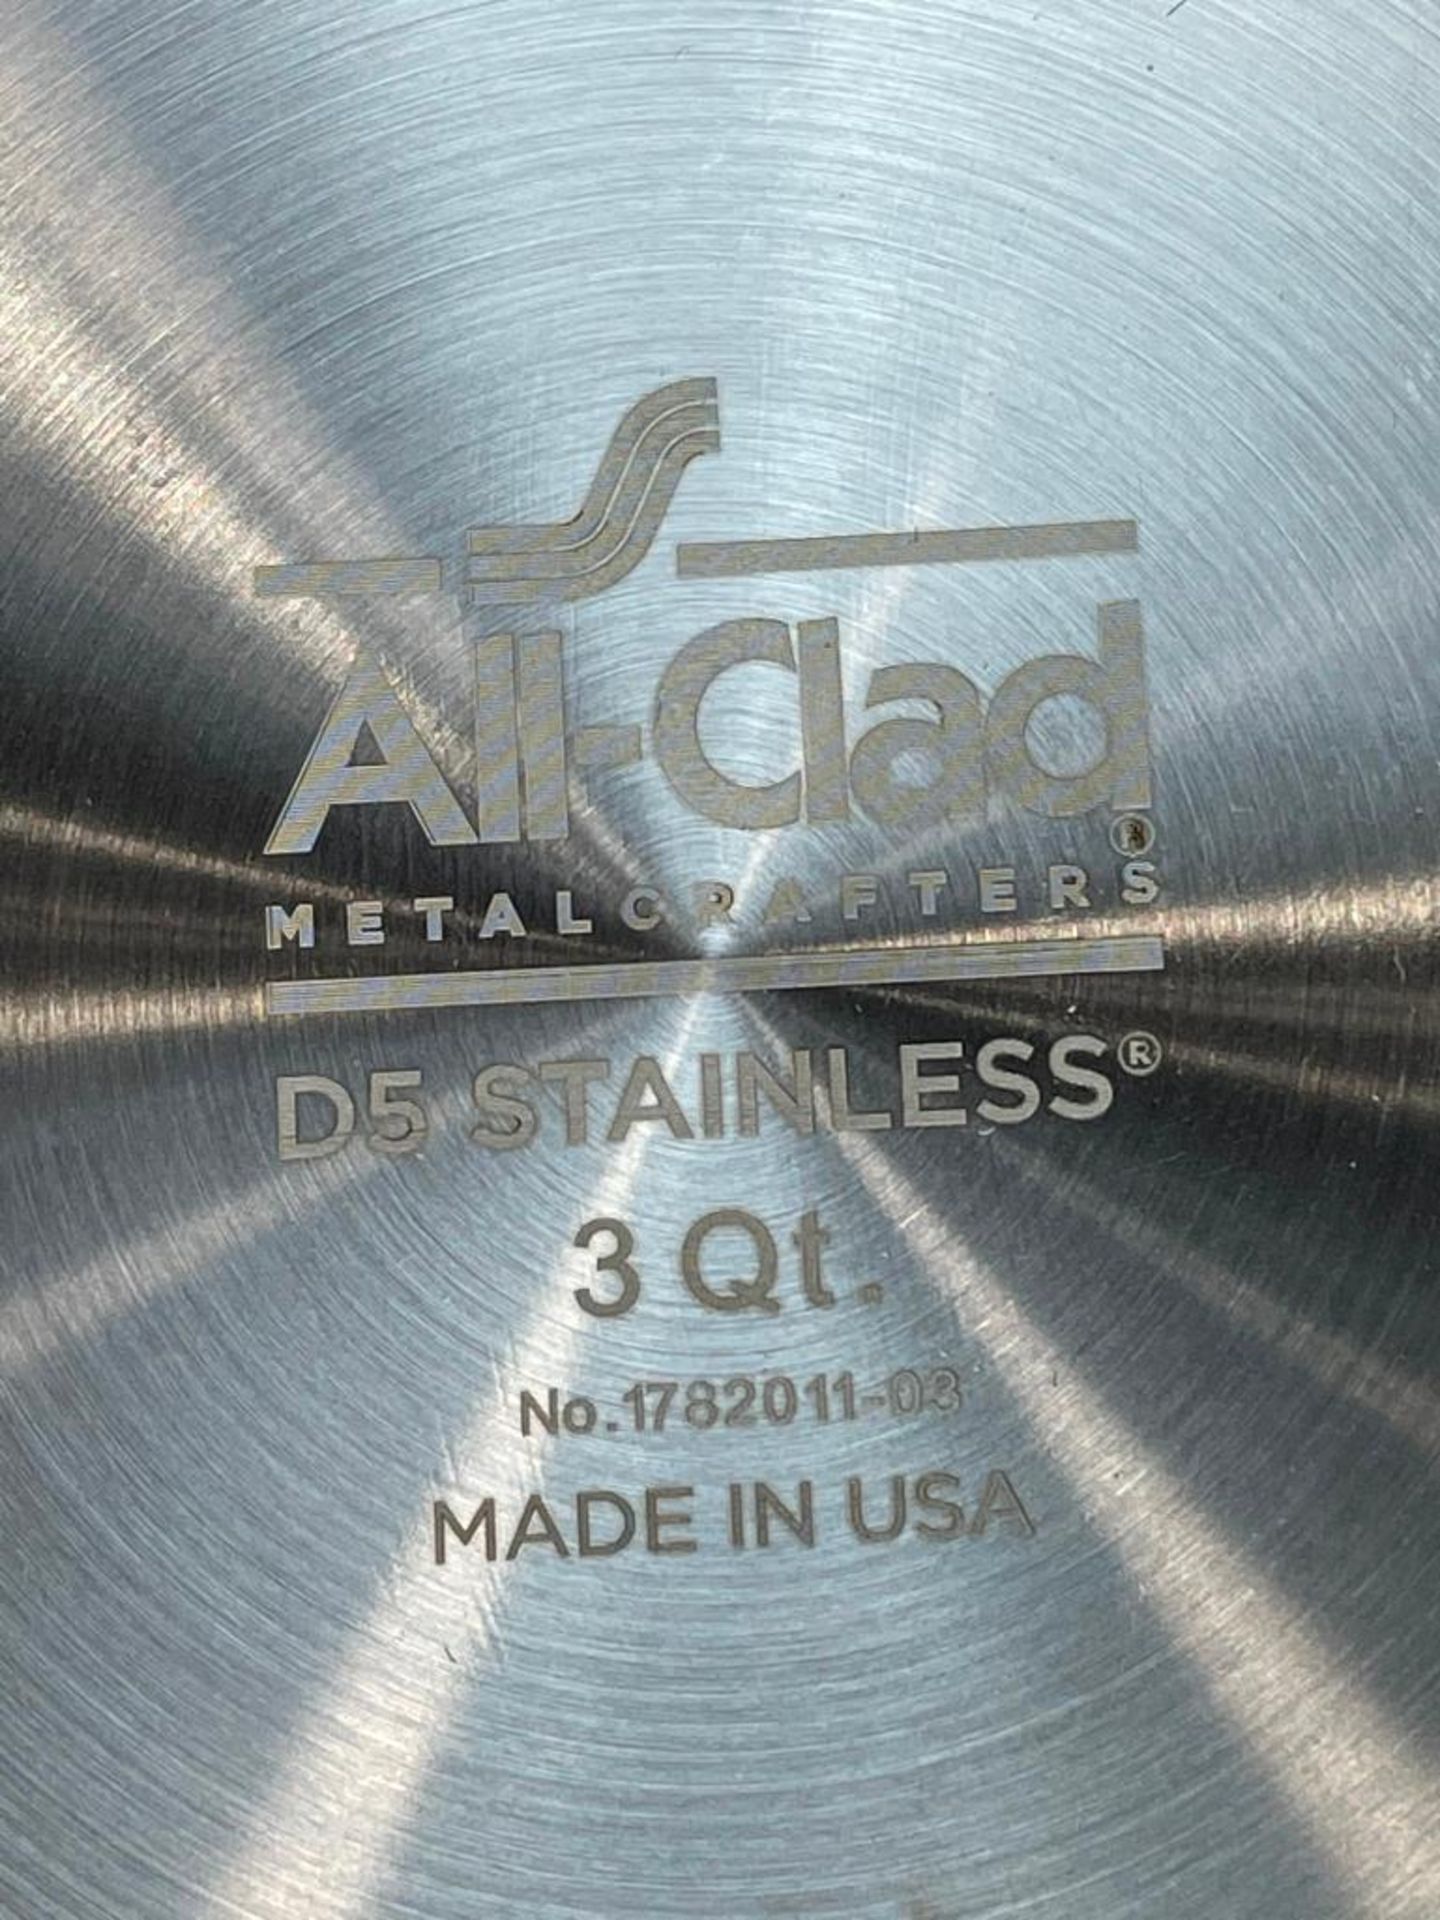 ALL CLAD D5 STAINLESS 3QT SAUCE PAN WITH LID - Image 3 of 3